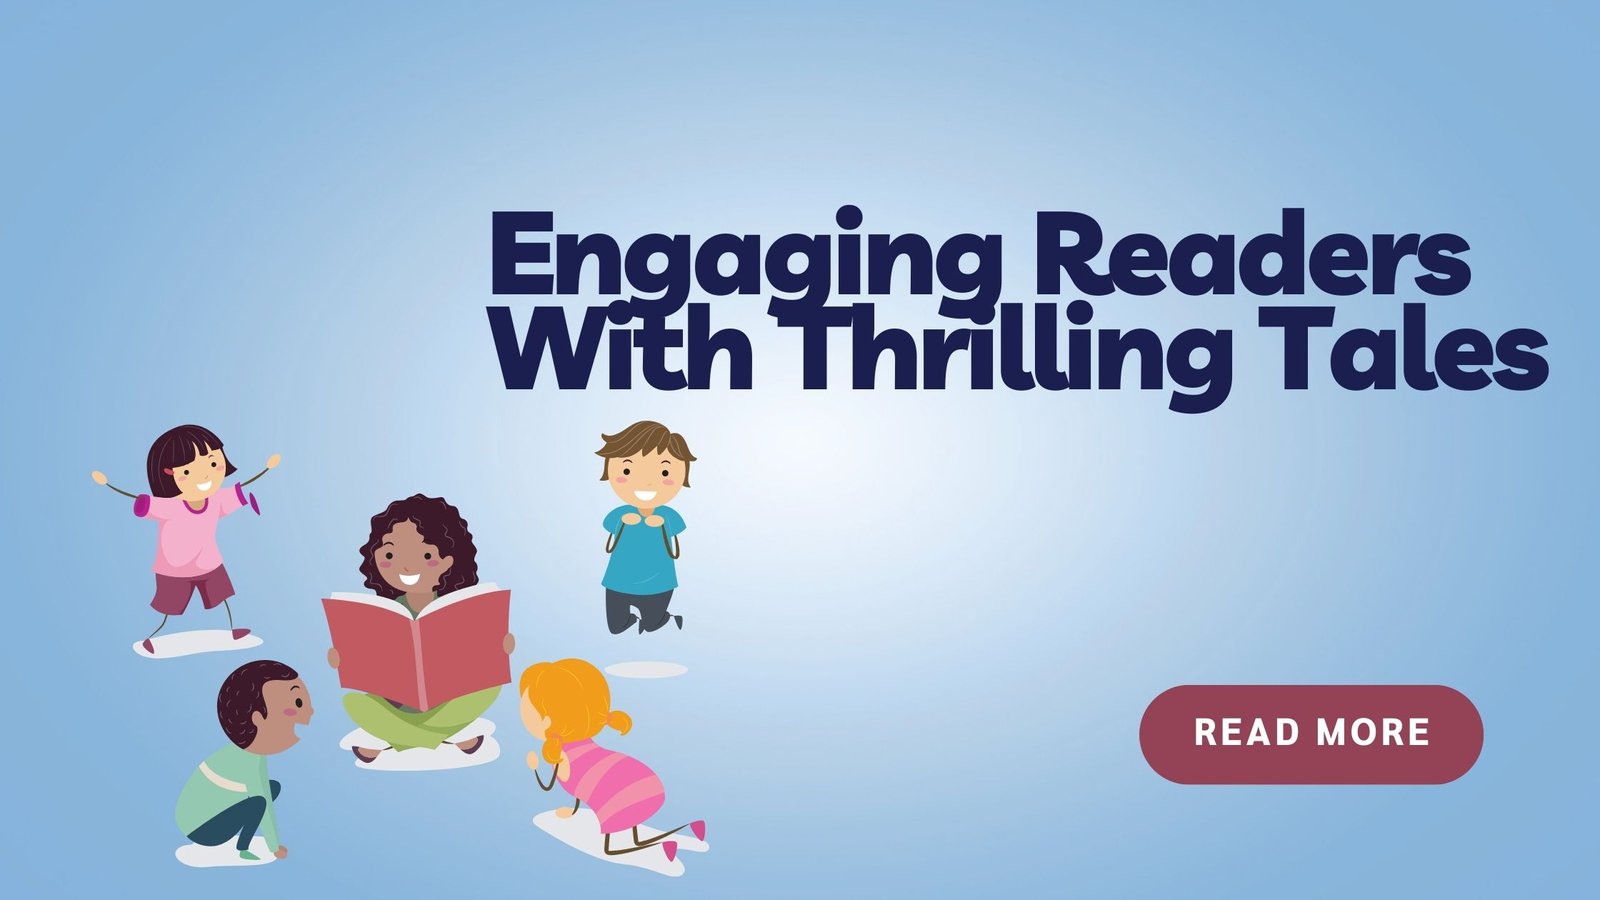 Engaging Readers With Thrilling Tales